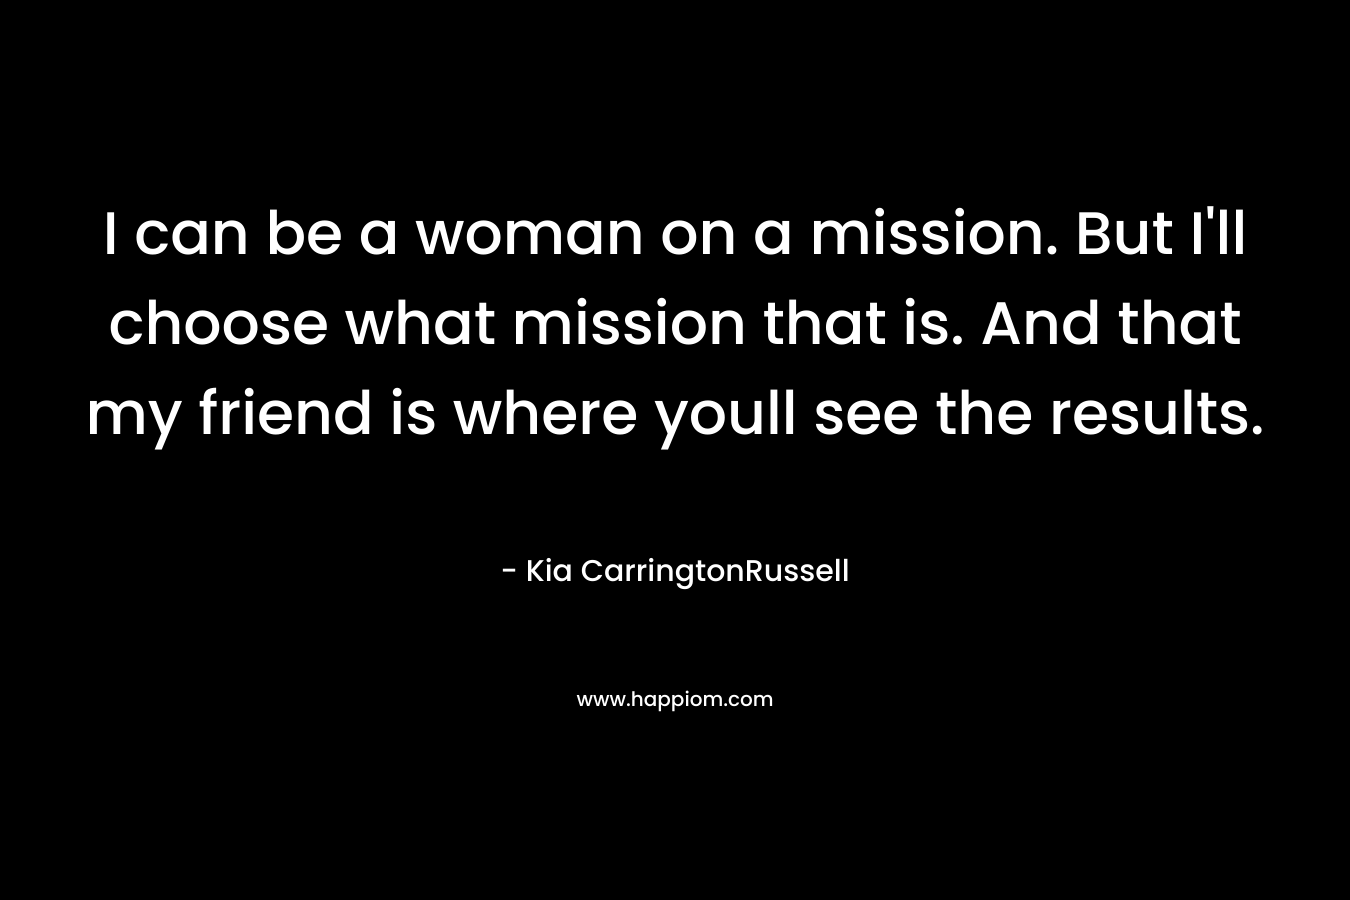 I can be a woman on a mission. But I'll choose what mission that is. And that my friend is where youll see the results.